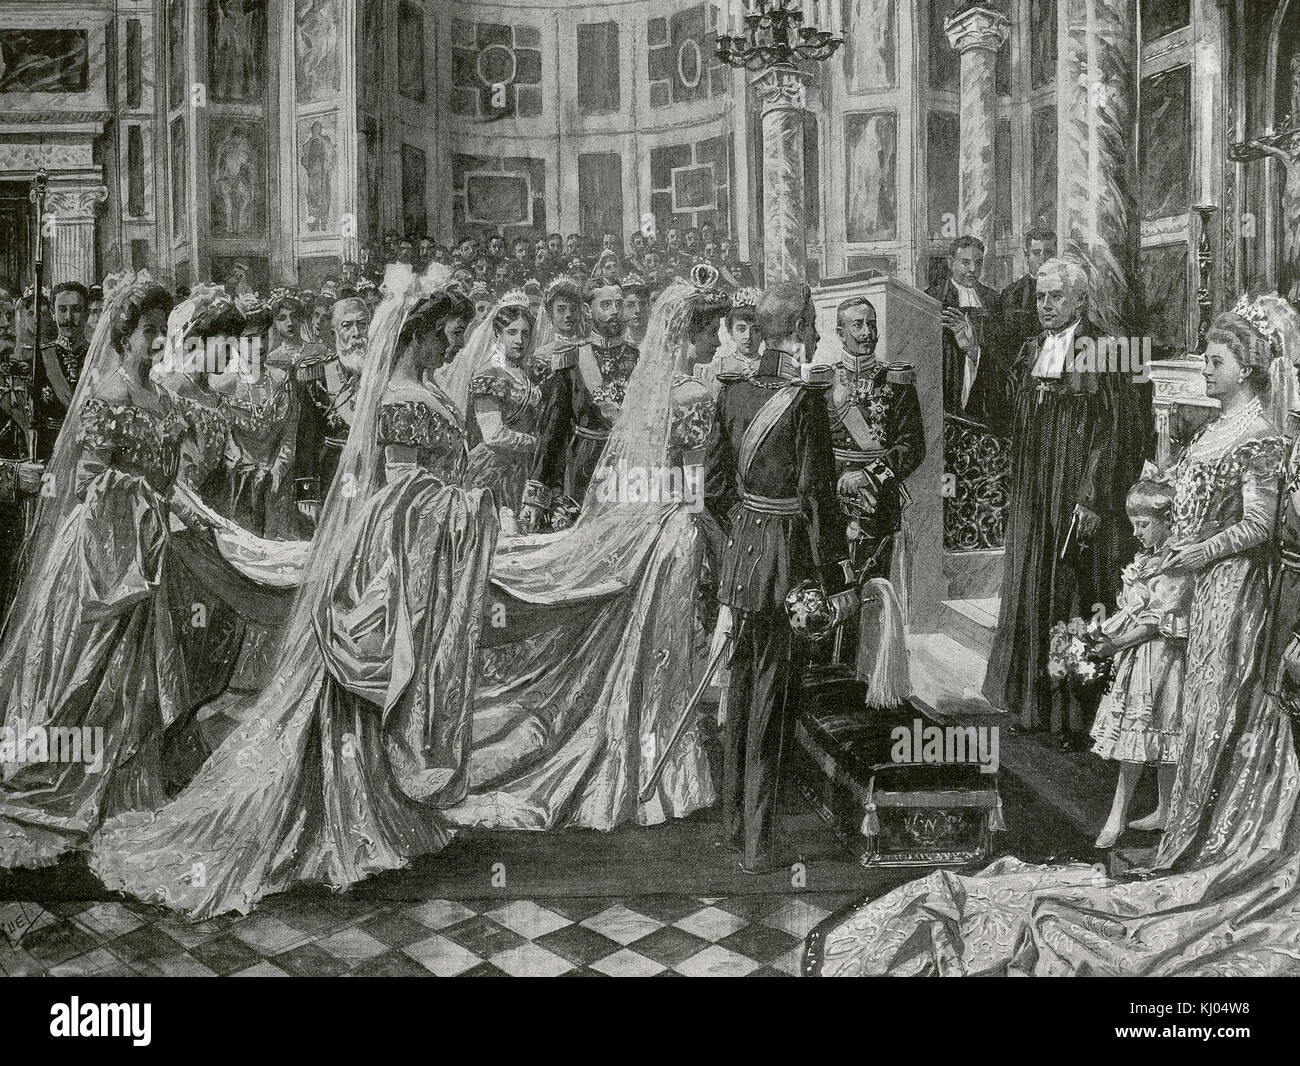 Wilhelm, German Crown Prince (1882-1951), the last  Crown Prince of the German Empire and the Kingdom of Prussia. Wedding of Wilhelm of Prussia with the Duchess Cecilia of Mecklenburg-Schwerin (1886-1954), held on June 6, 1905 in the chapel of the castle of Berlin, with the presence of his father, the German Emperor Wilhelm II (1859-1941). Engraving.'L'Illustration'. Stock Photo